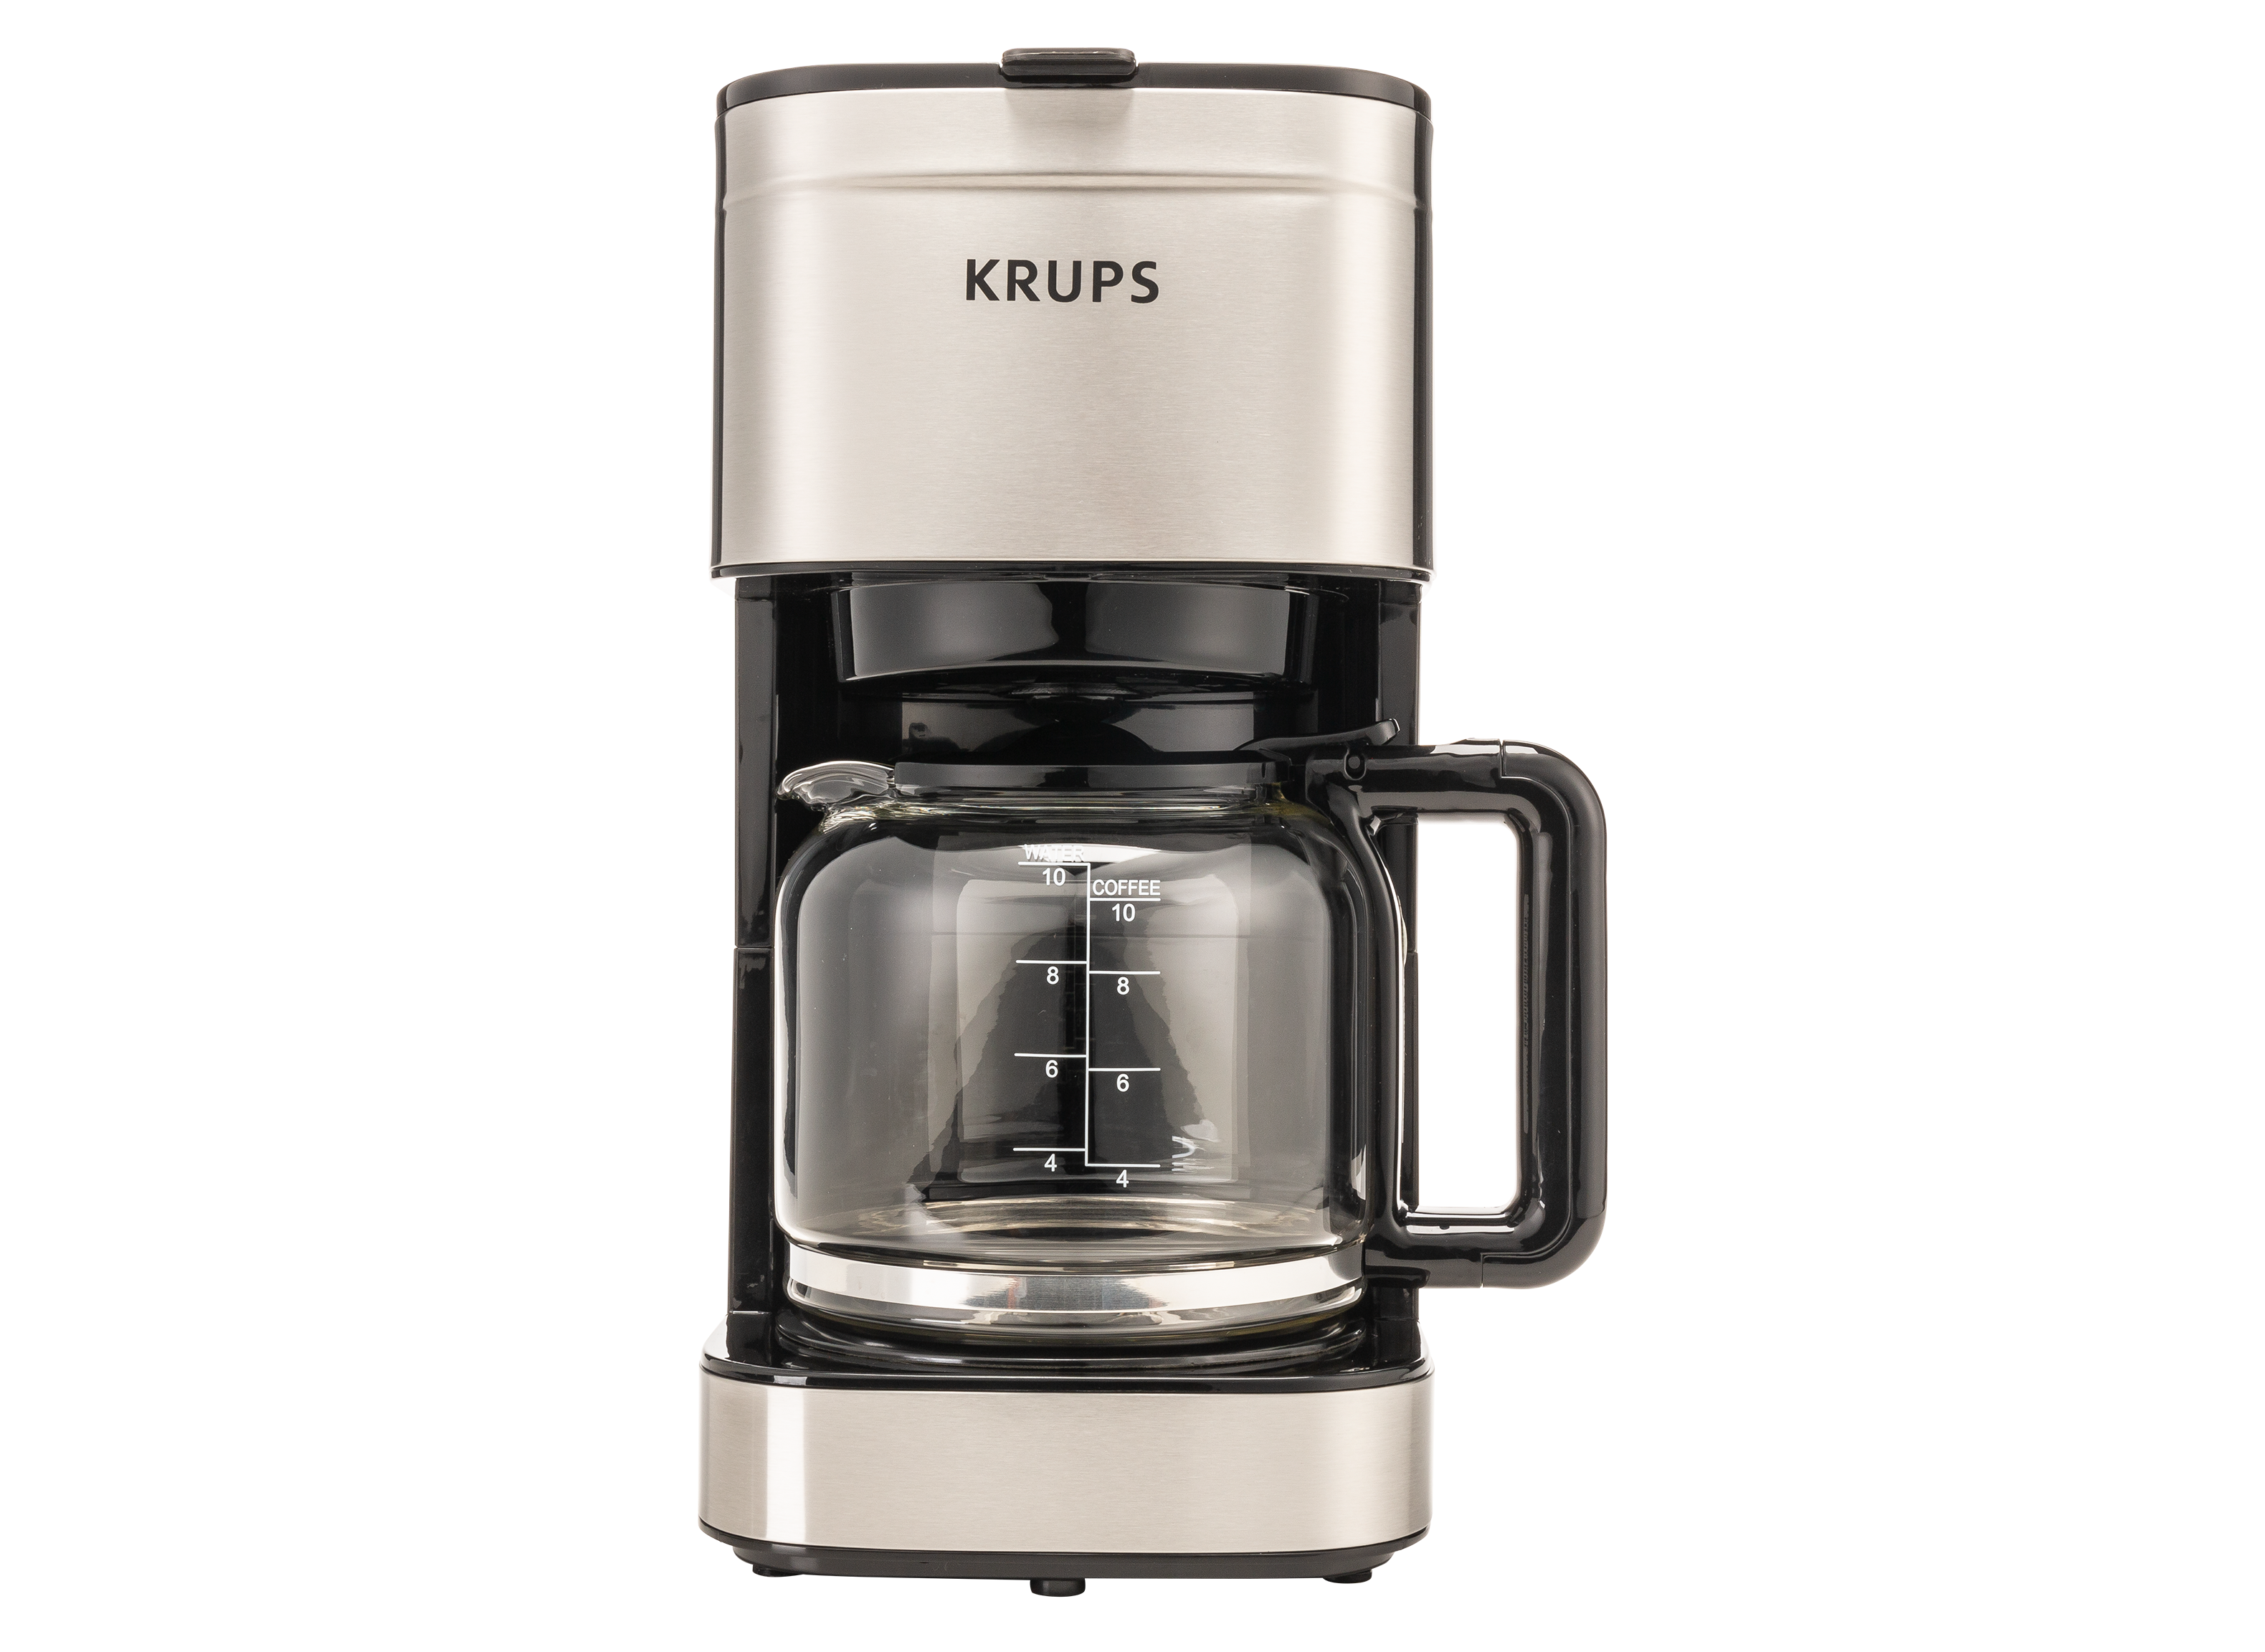 https://crdms.images.consumerreports.org/prod/products/cr/models/404049-drip-coffee-makers-with-carafe-krups-simply-brew-10021620.png